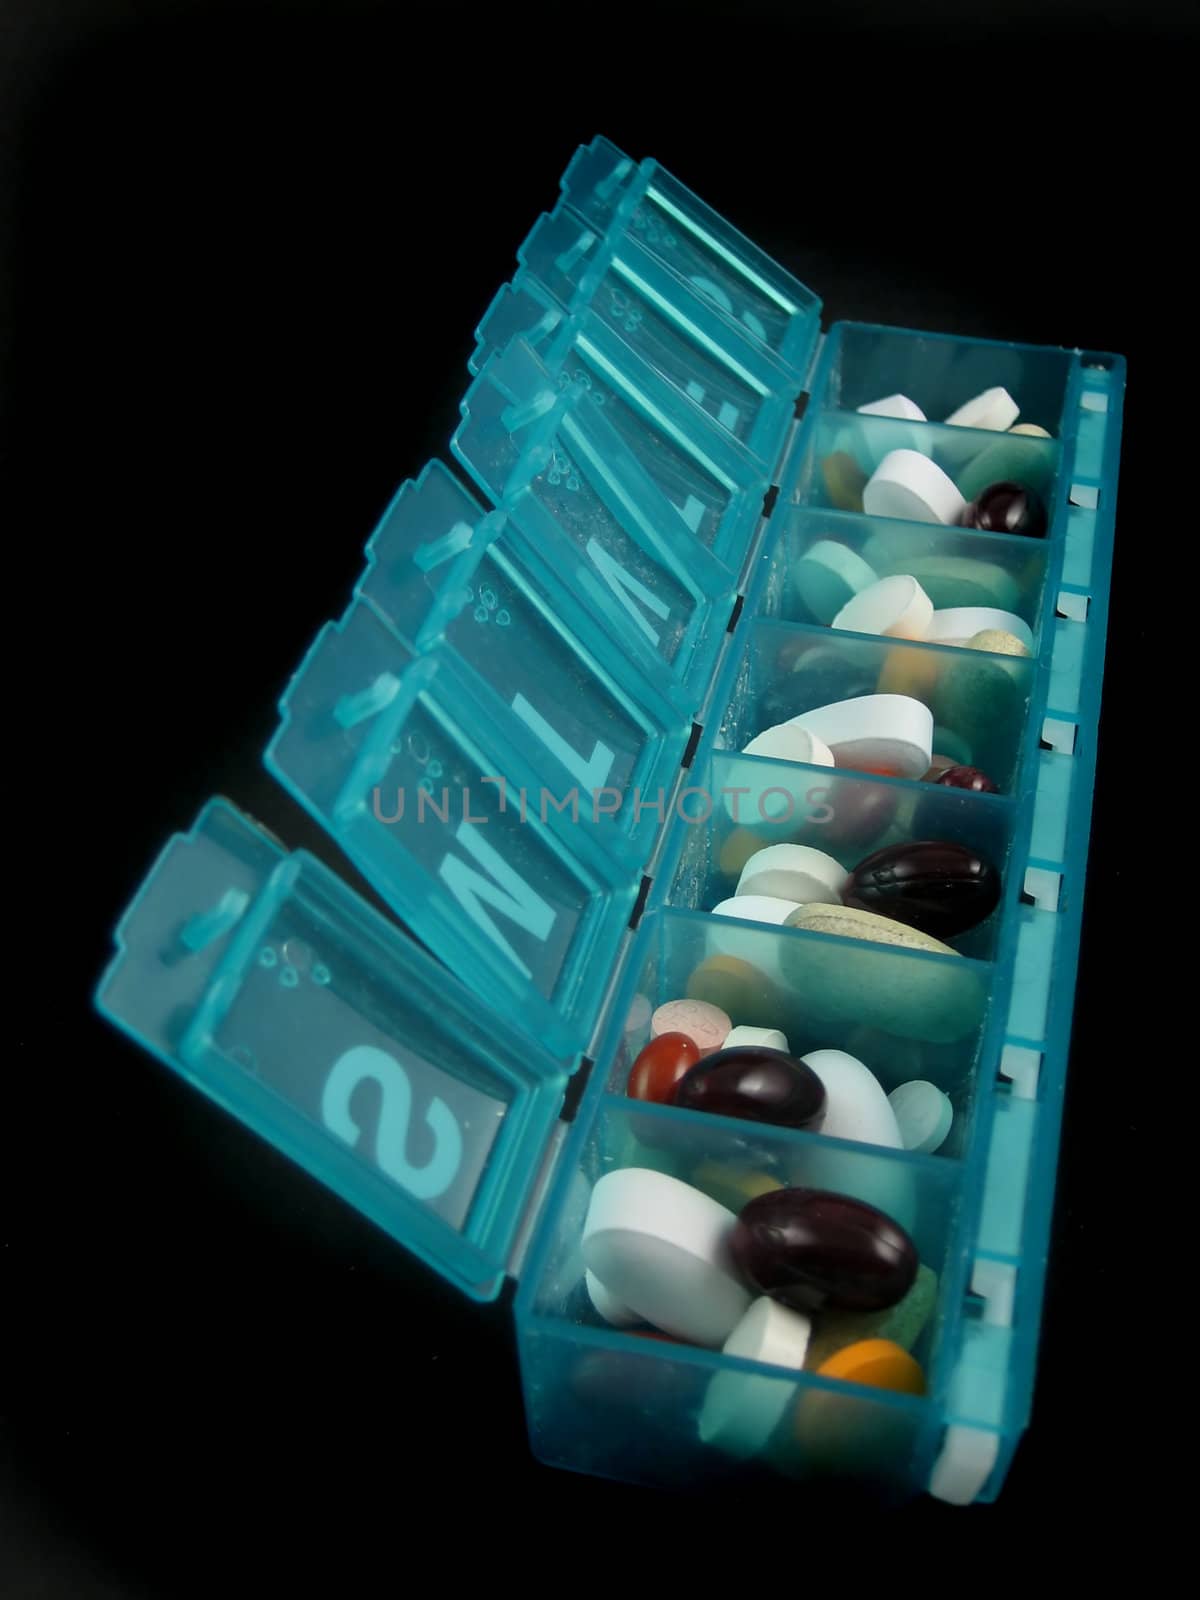 Pills and medicines by albln